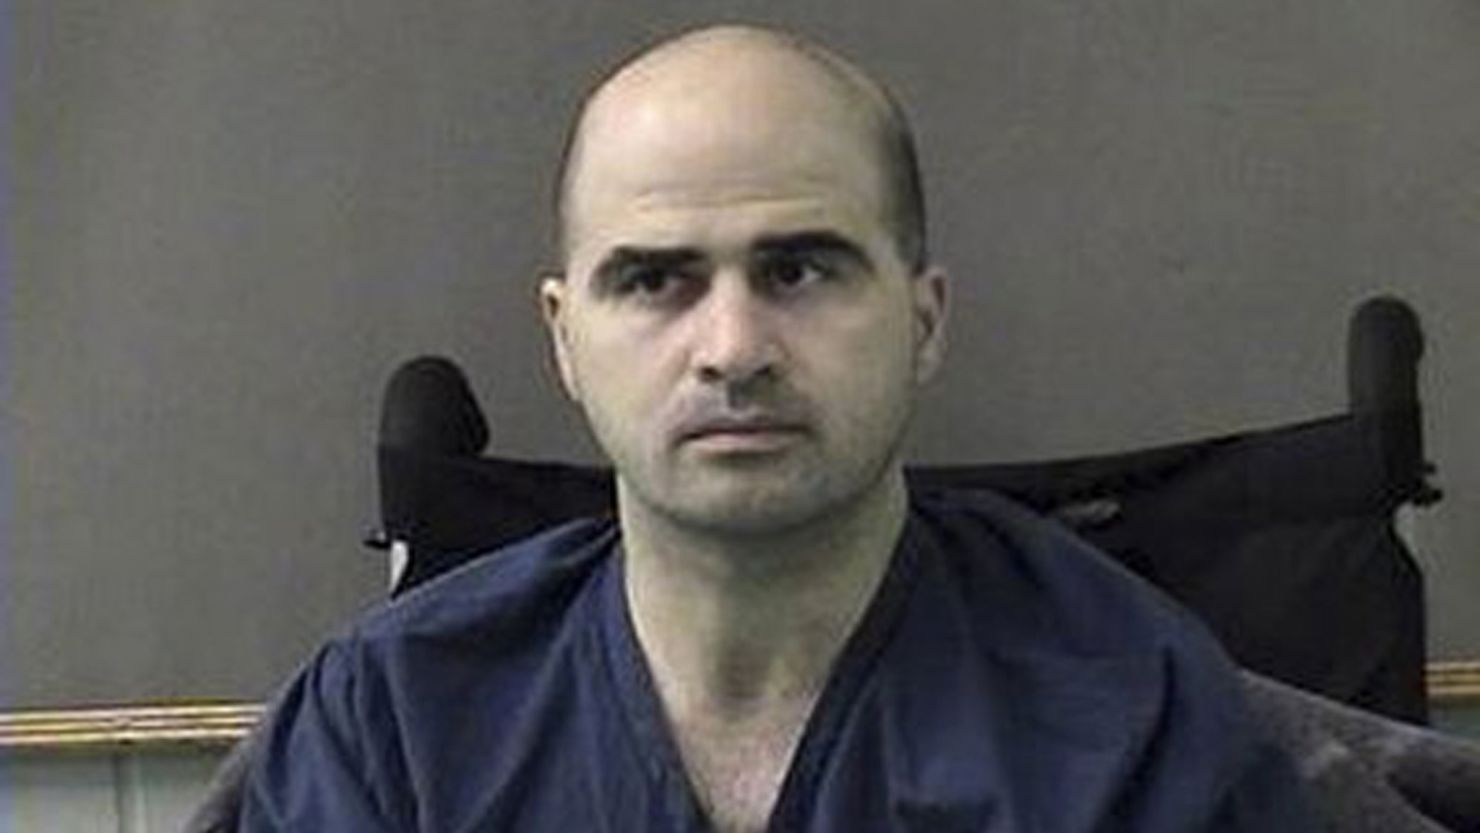 US Army psychiatrist Maj. Nidal Hasan, who is charged with the Fort Hood shooting rampage, will face a military trial and a potential death sentence if he is found guilty